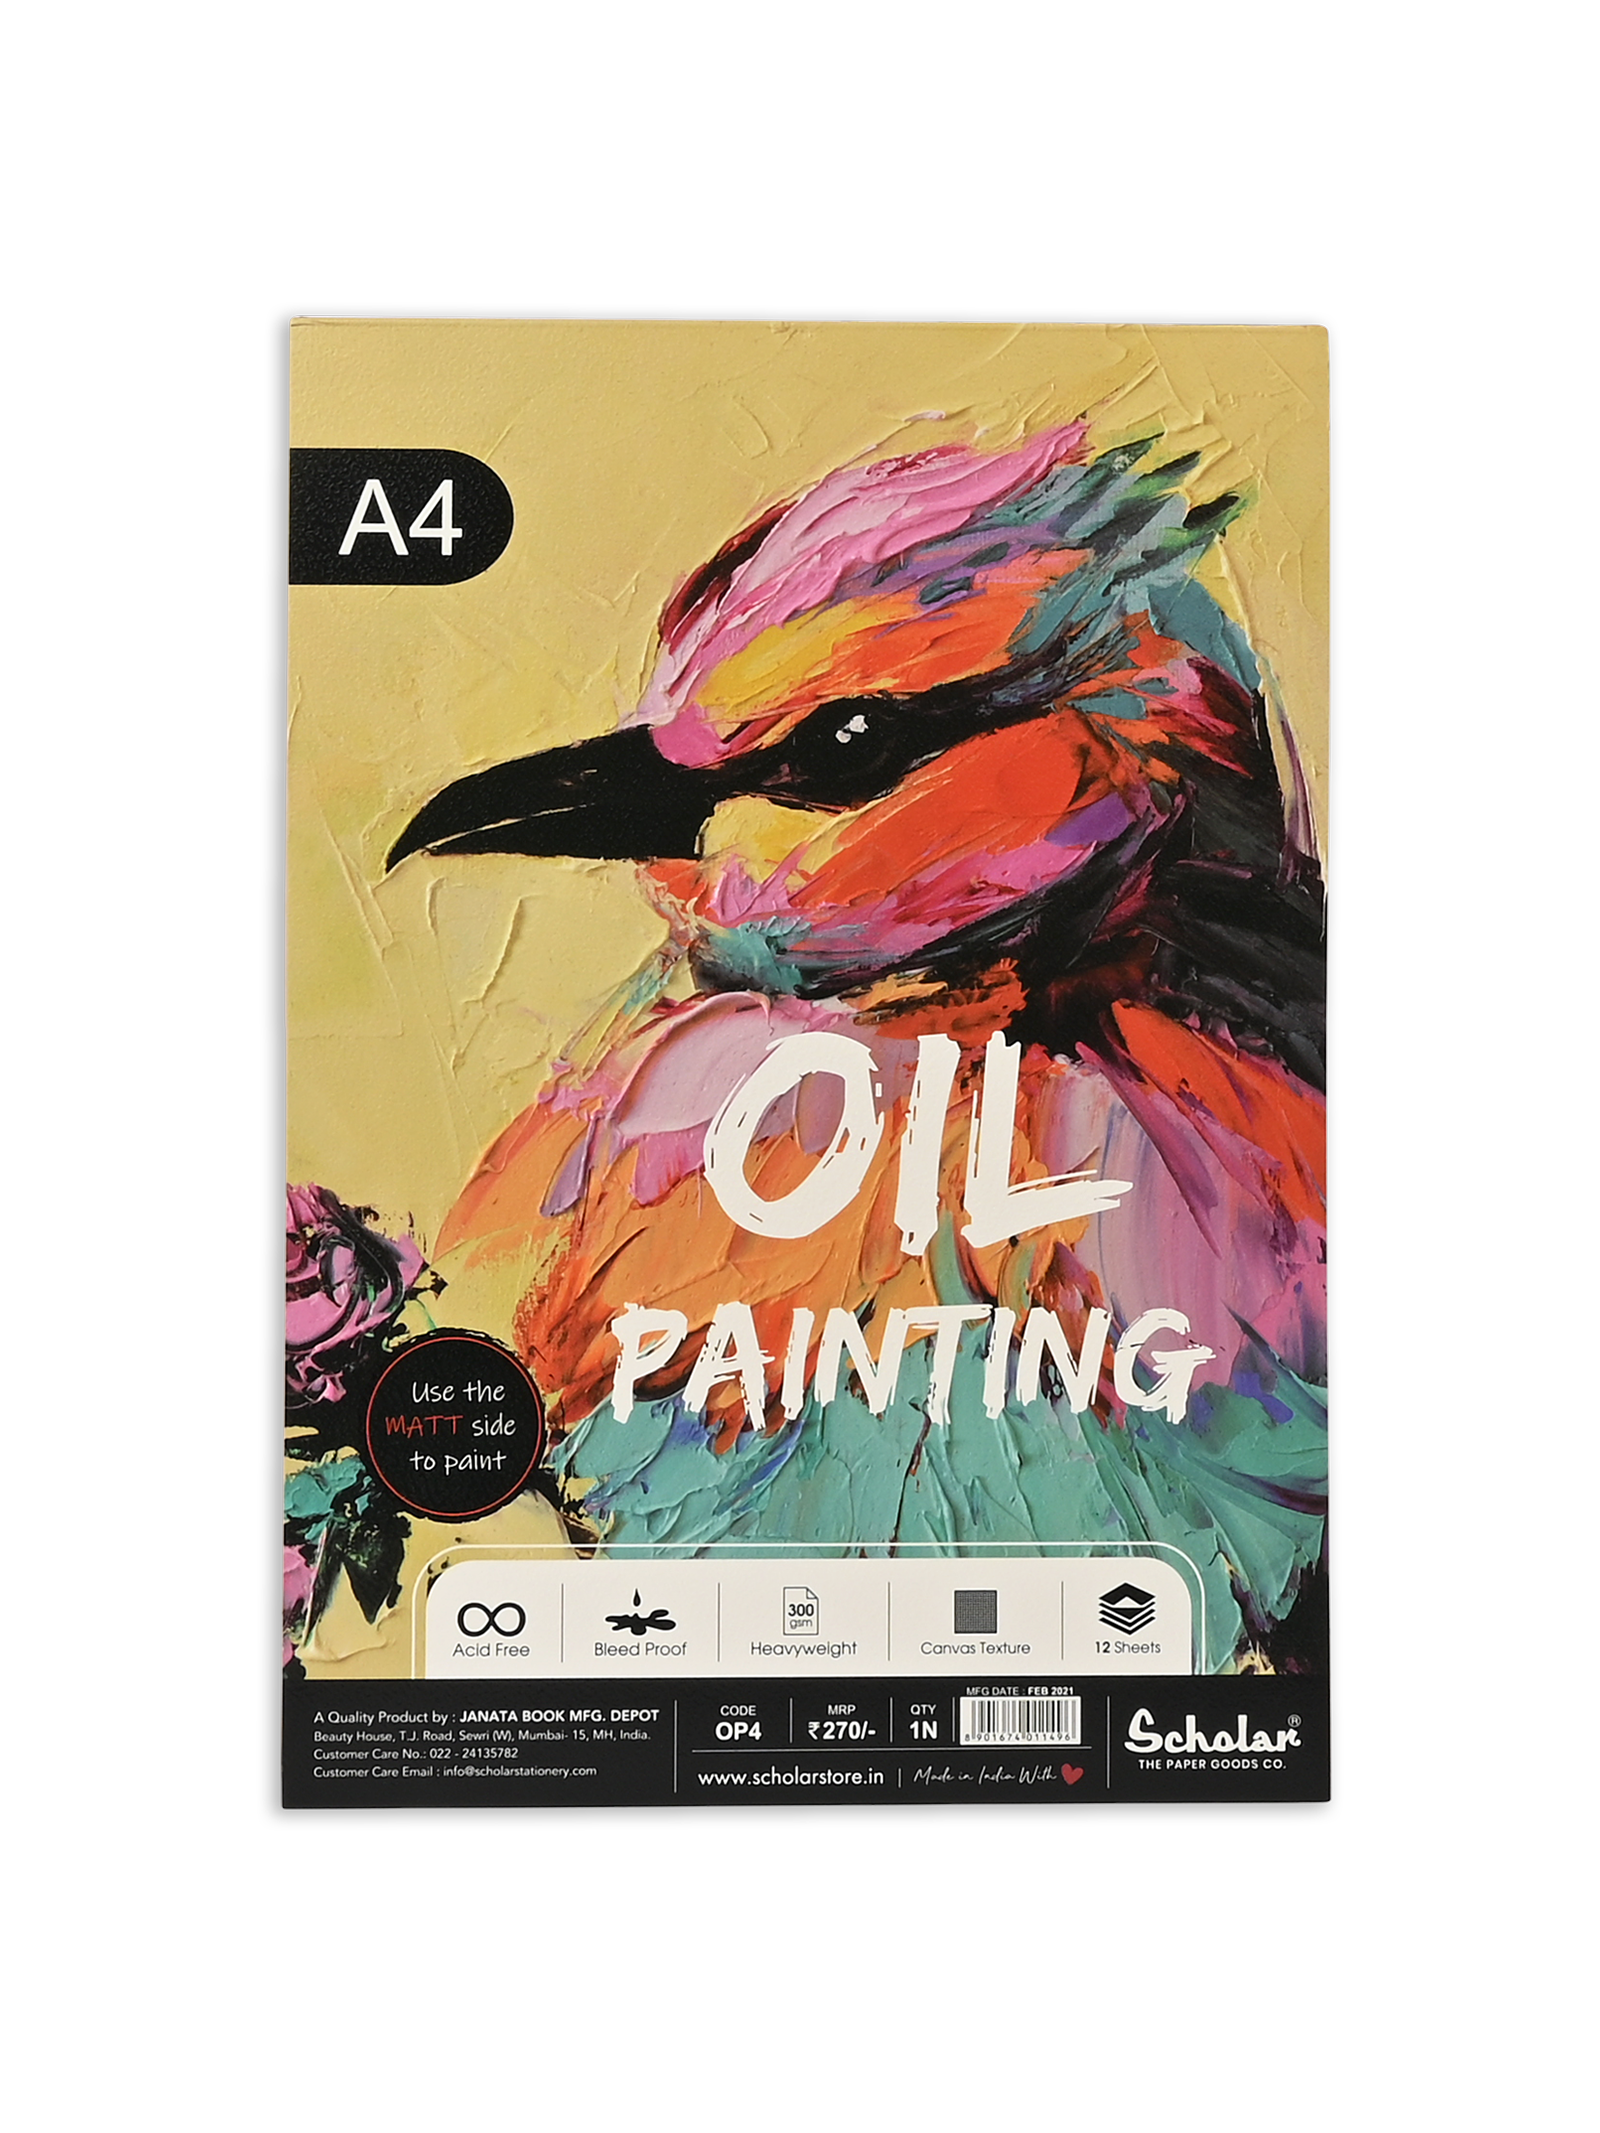 Oil Canvas Pad Professional Oil Painting Book Oil - Temu